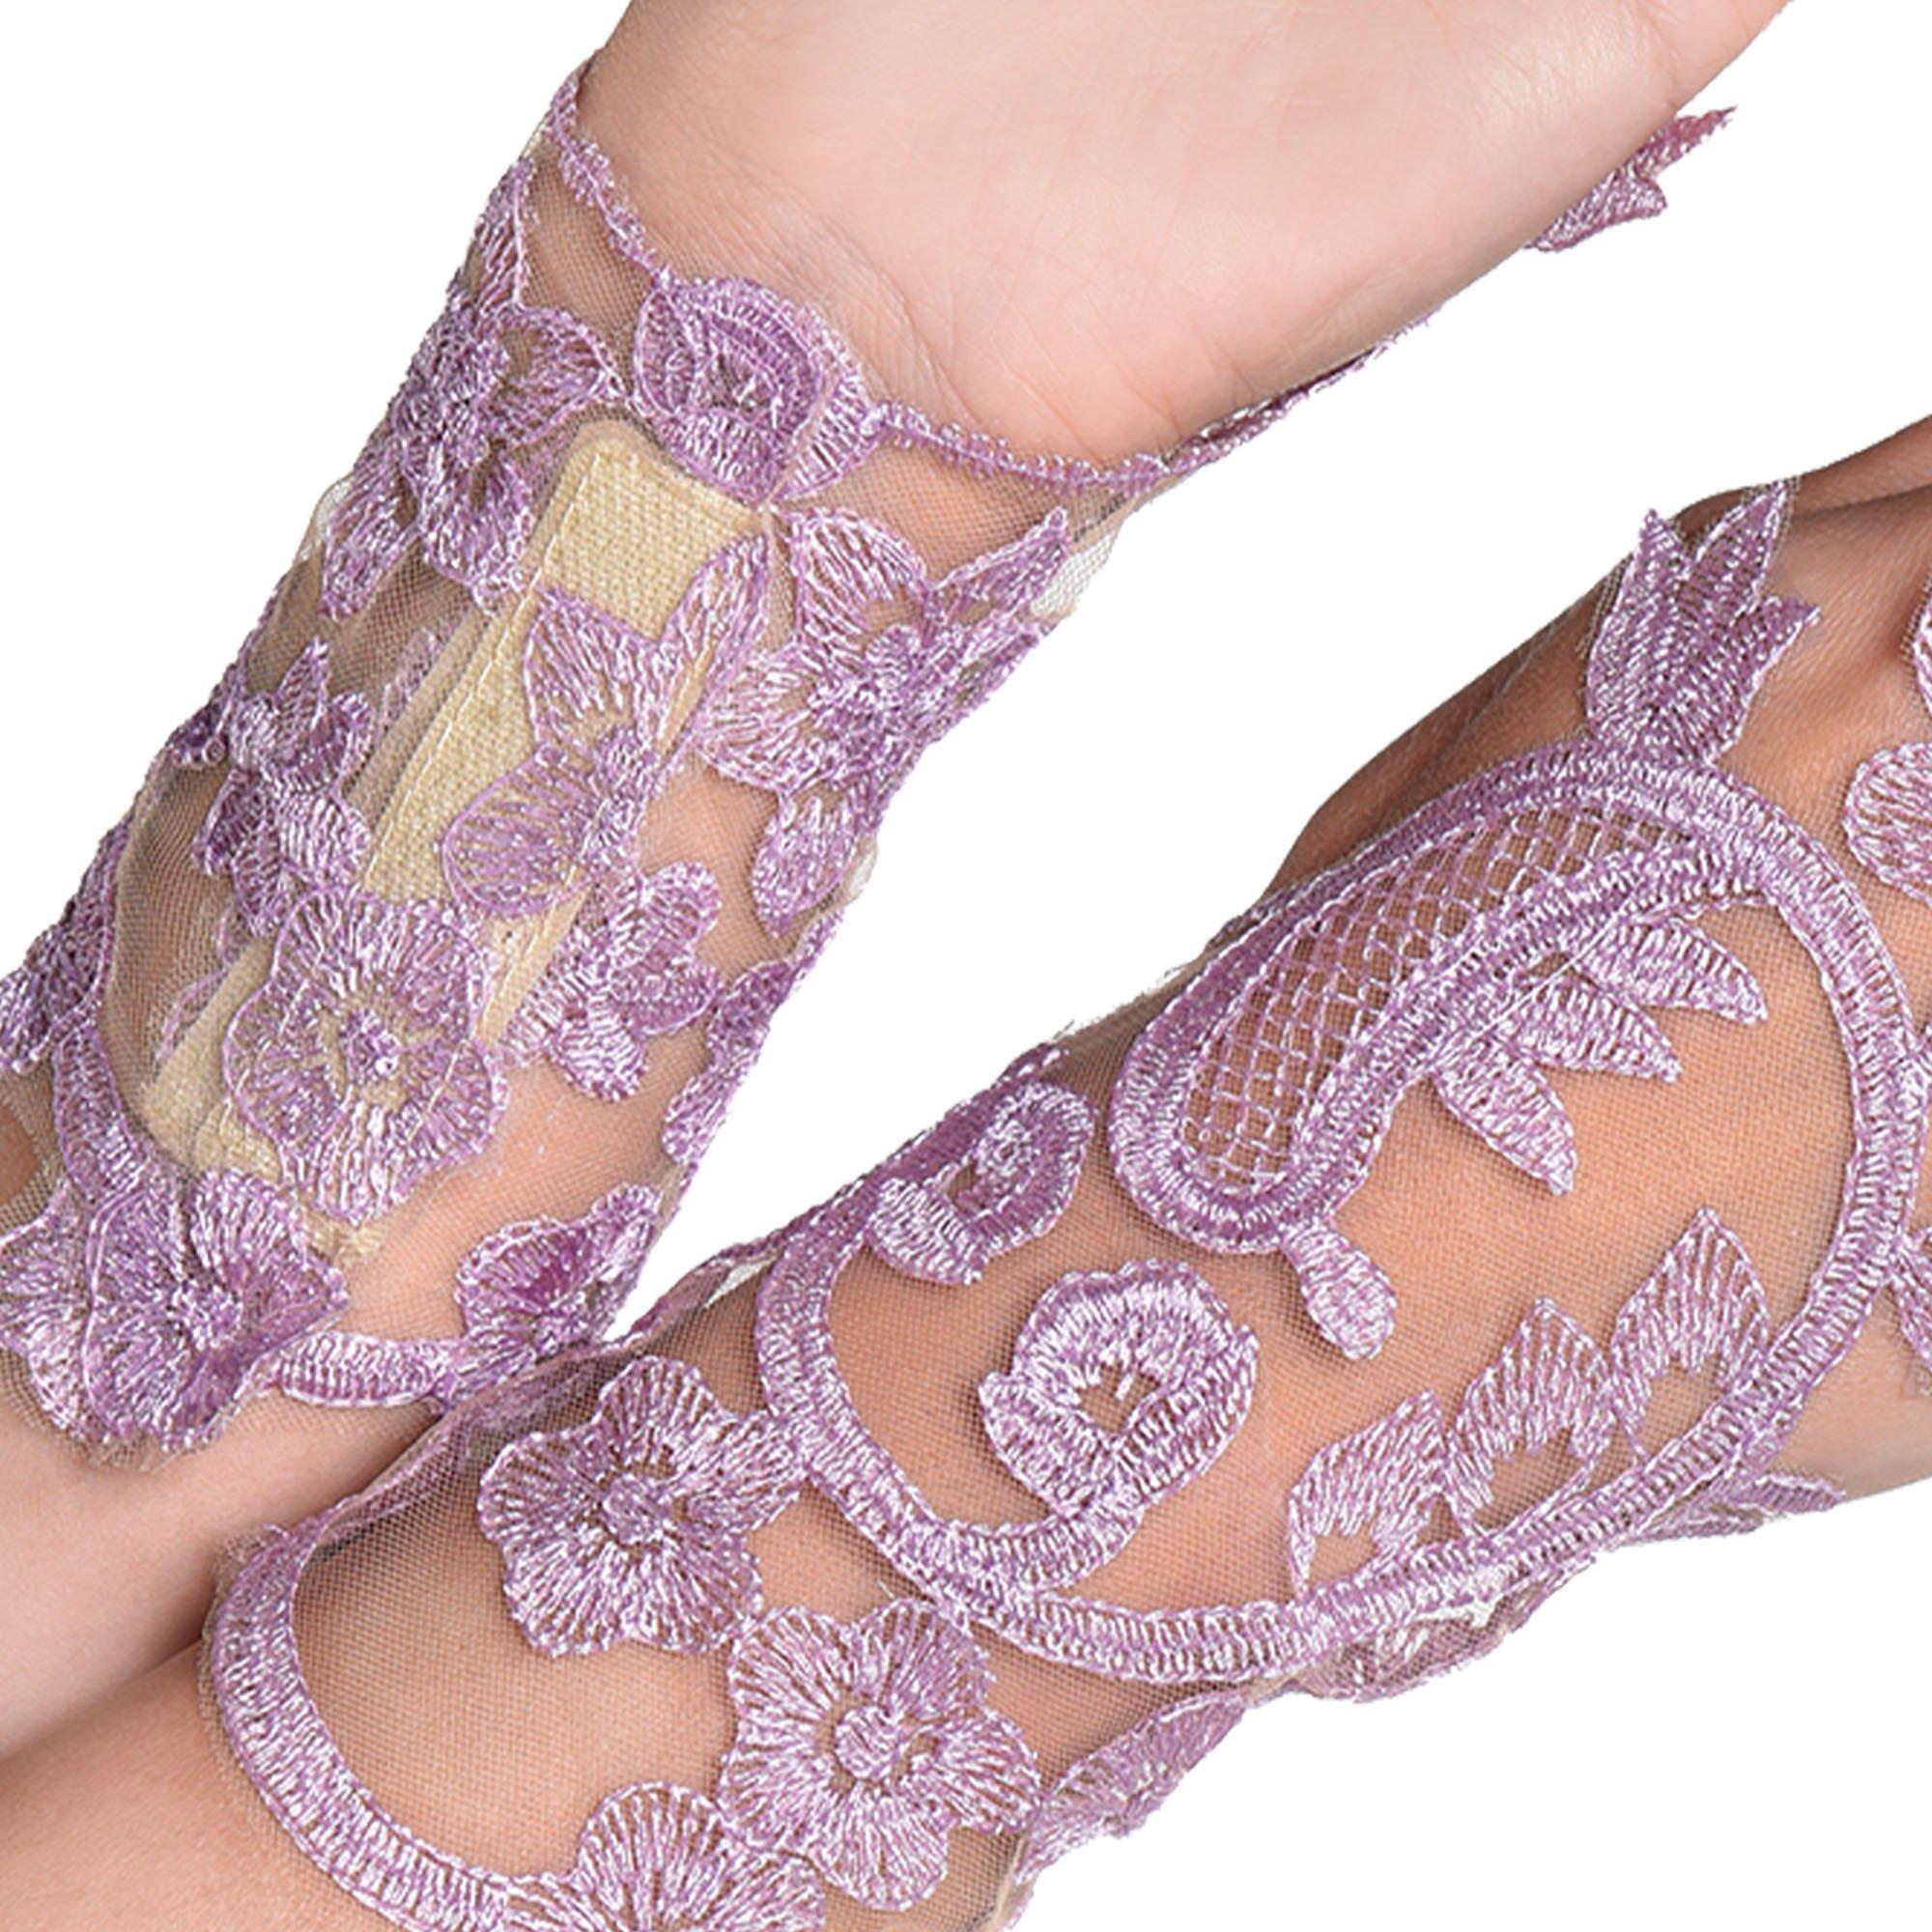 Adult Lavender Floral Embroidery Glovelettes, 1 Pair - Fairy